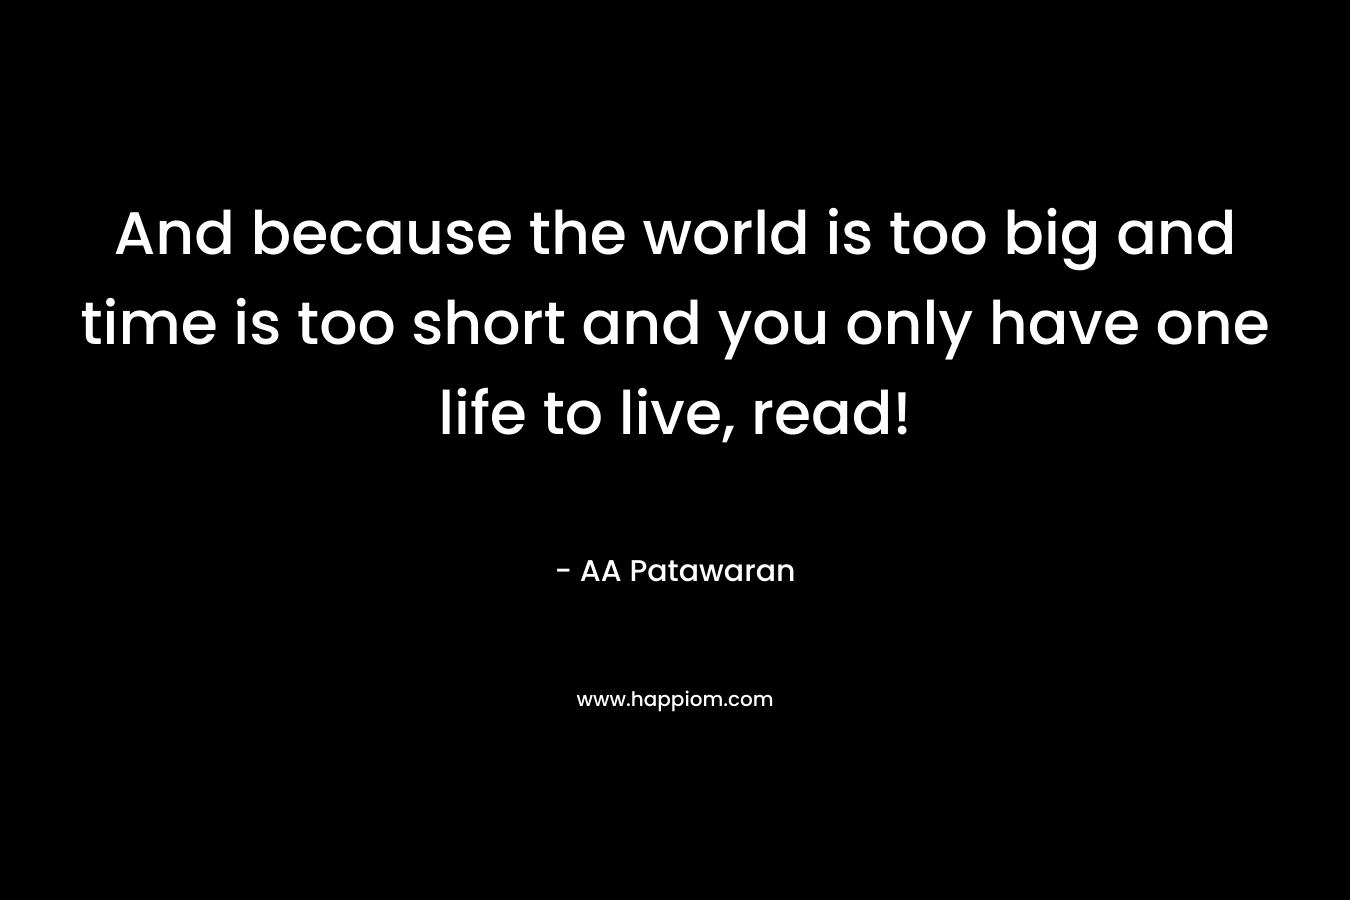 And because the world is too big and time is too short and you only have one life to live, read! – AA Patawaran